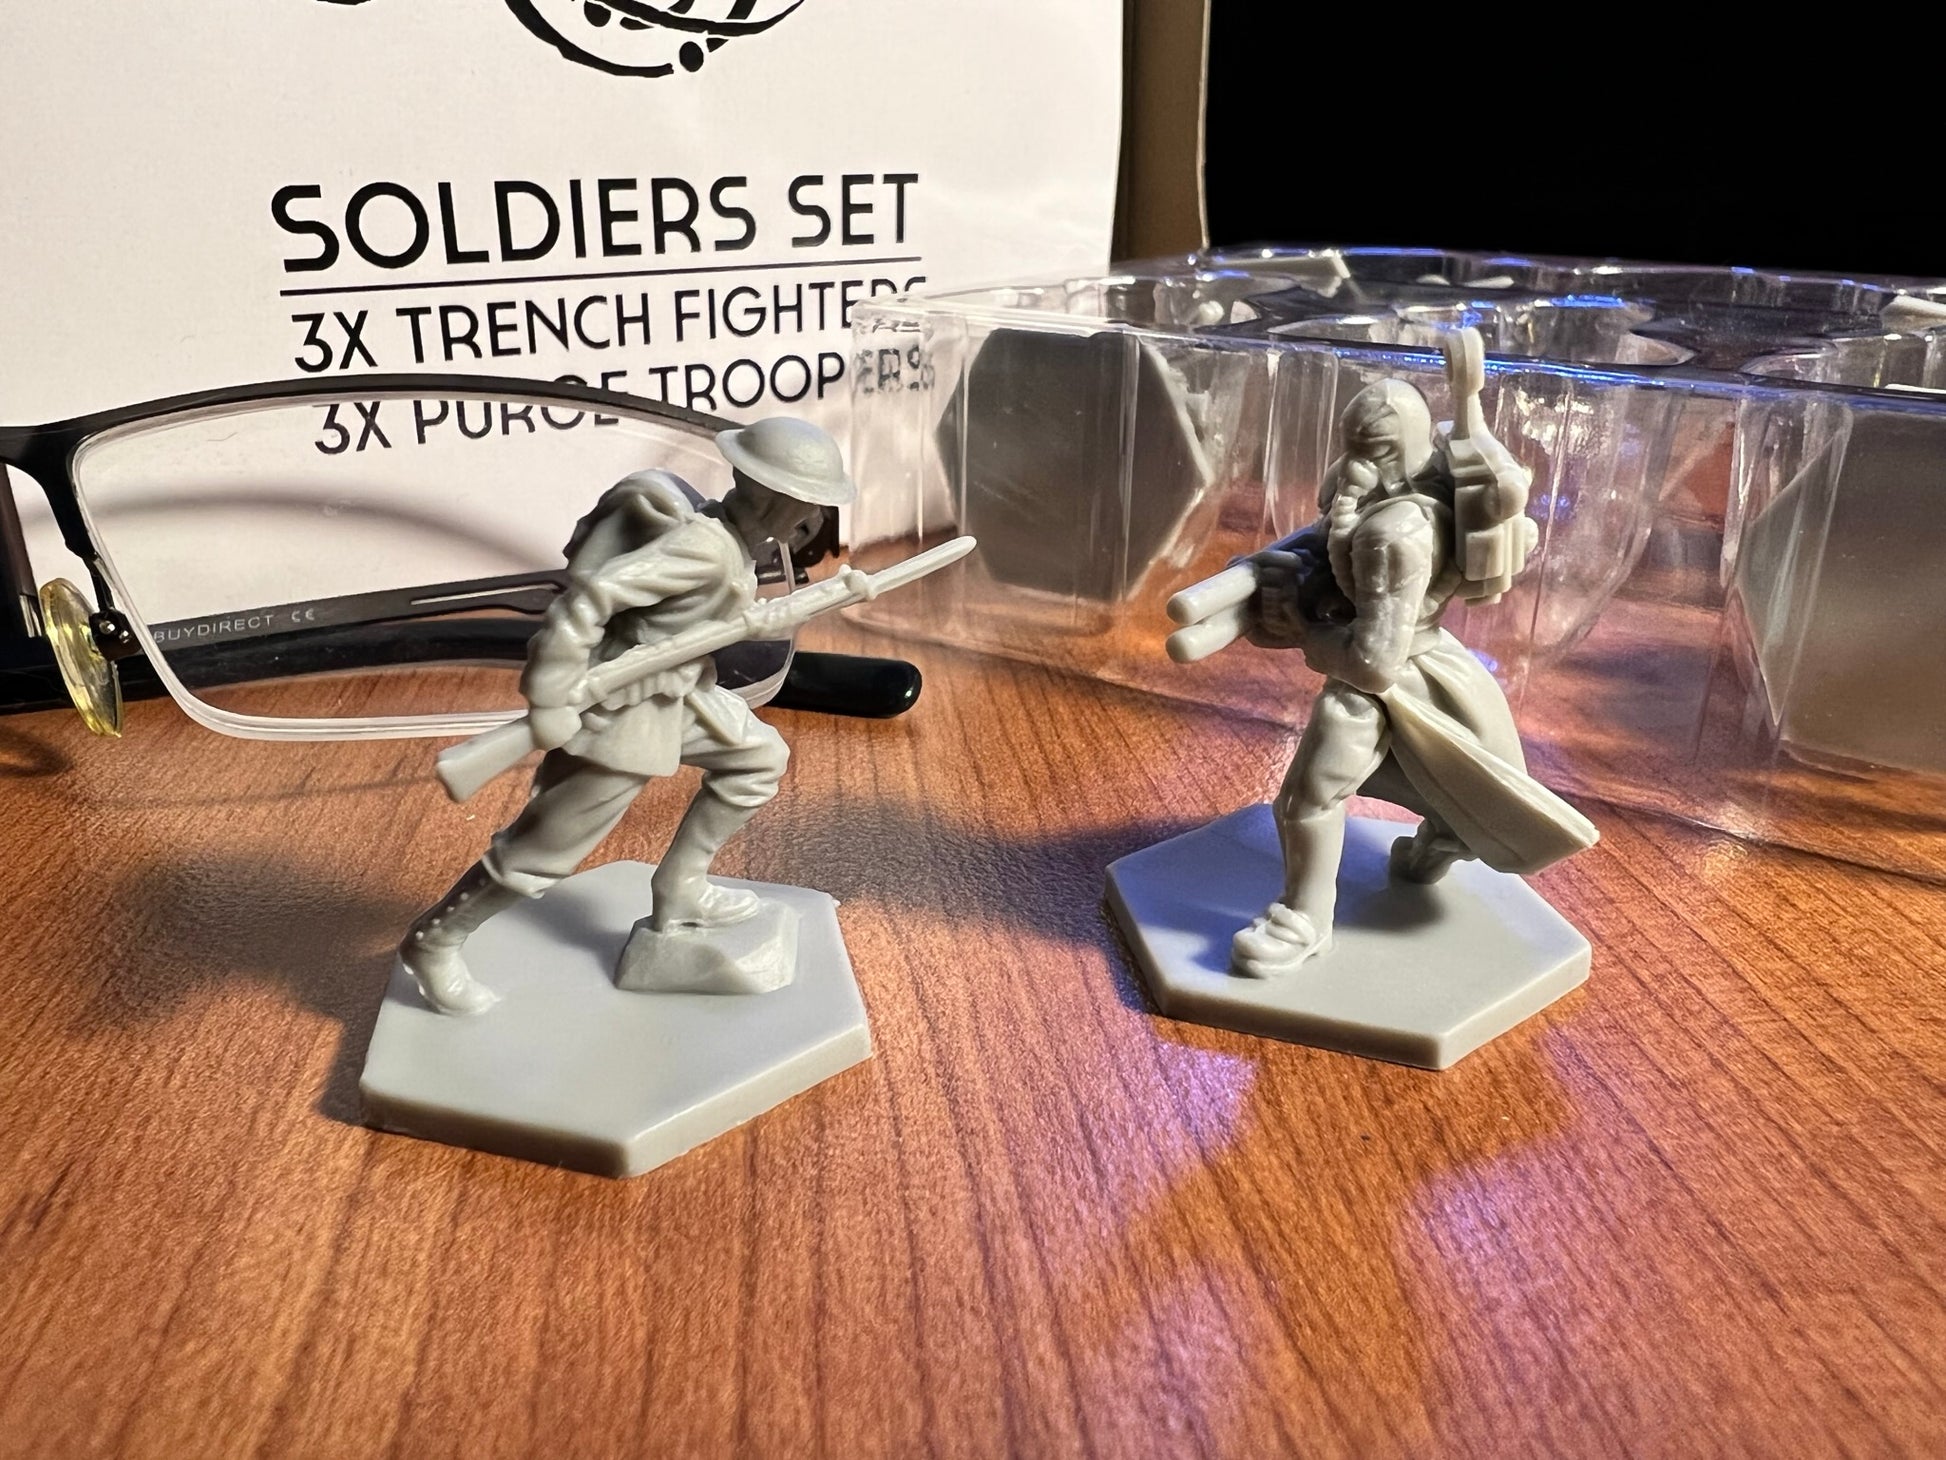 Trench fighter and purge trooper miniatures facing off